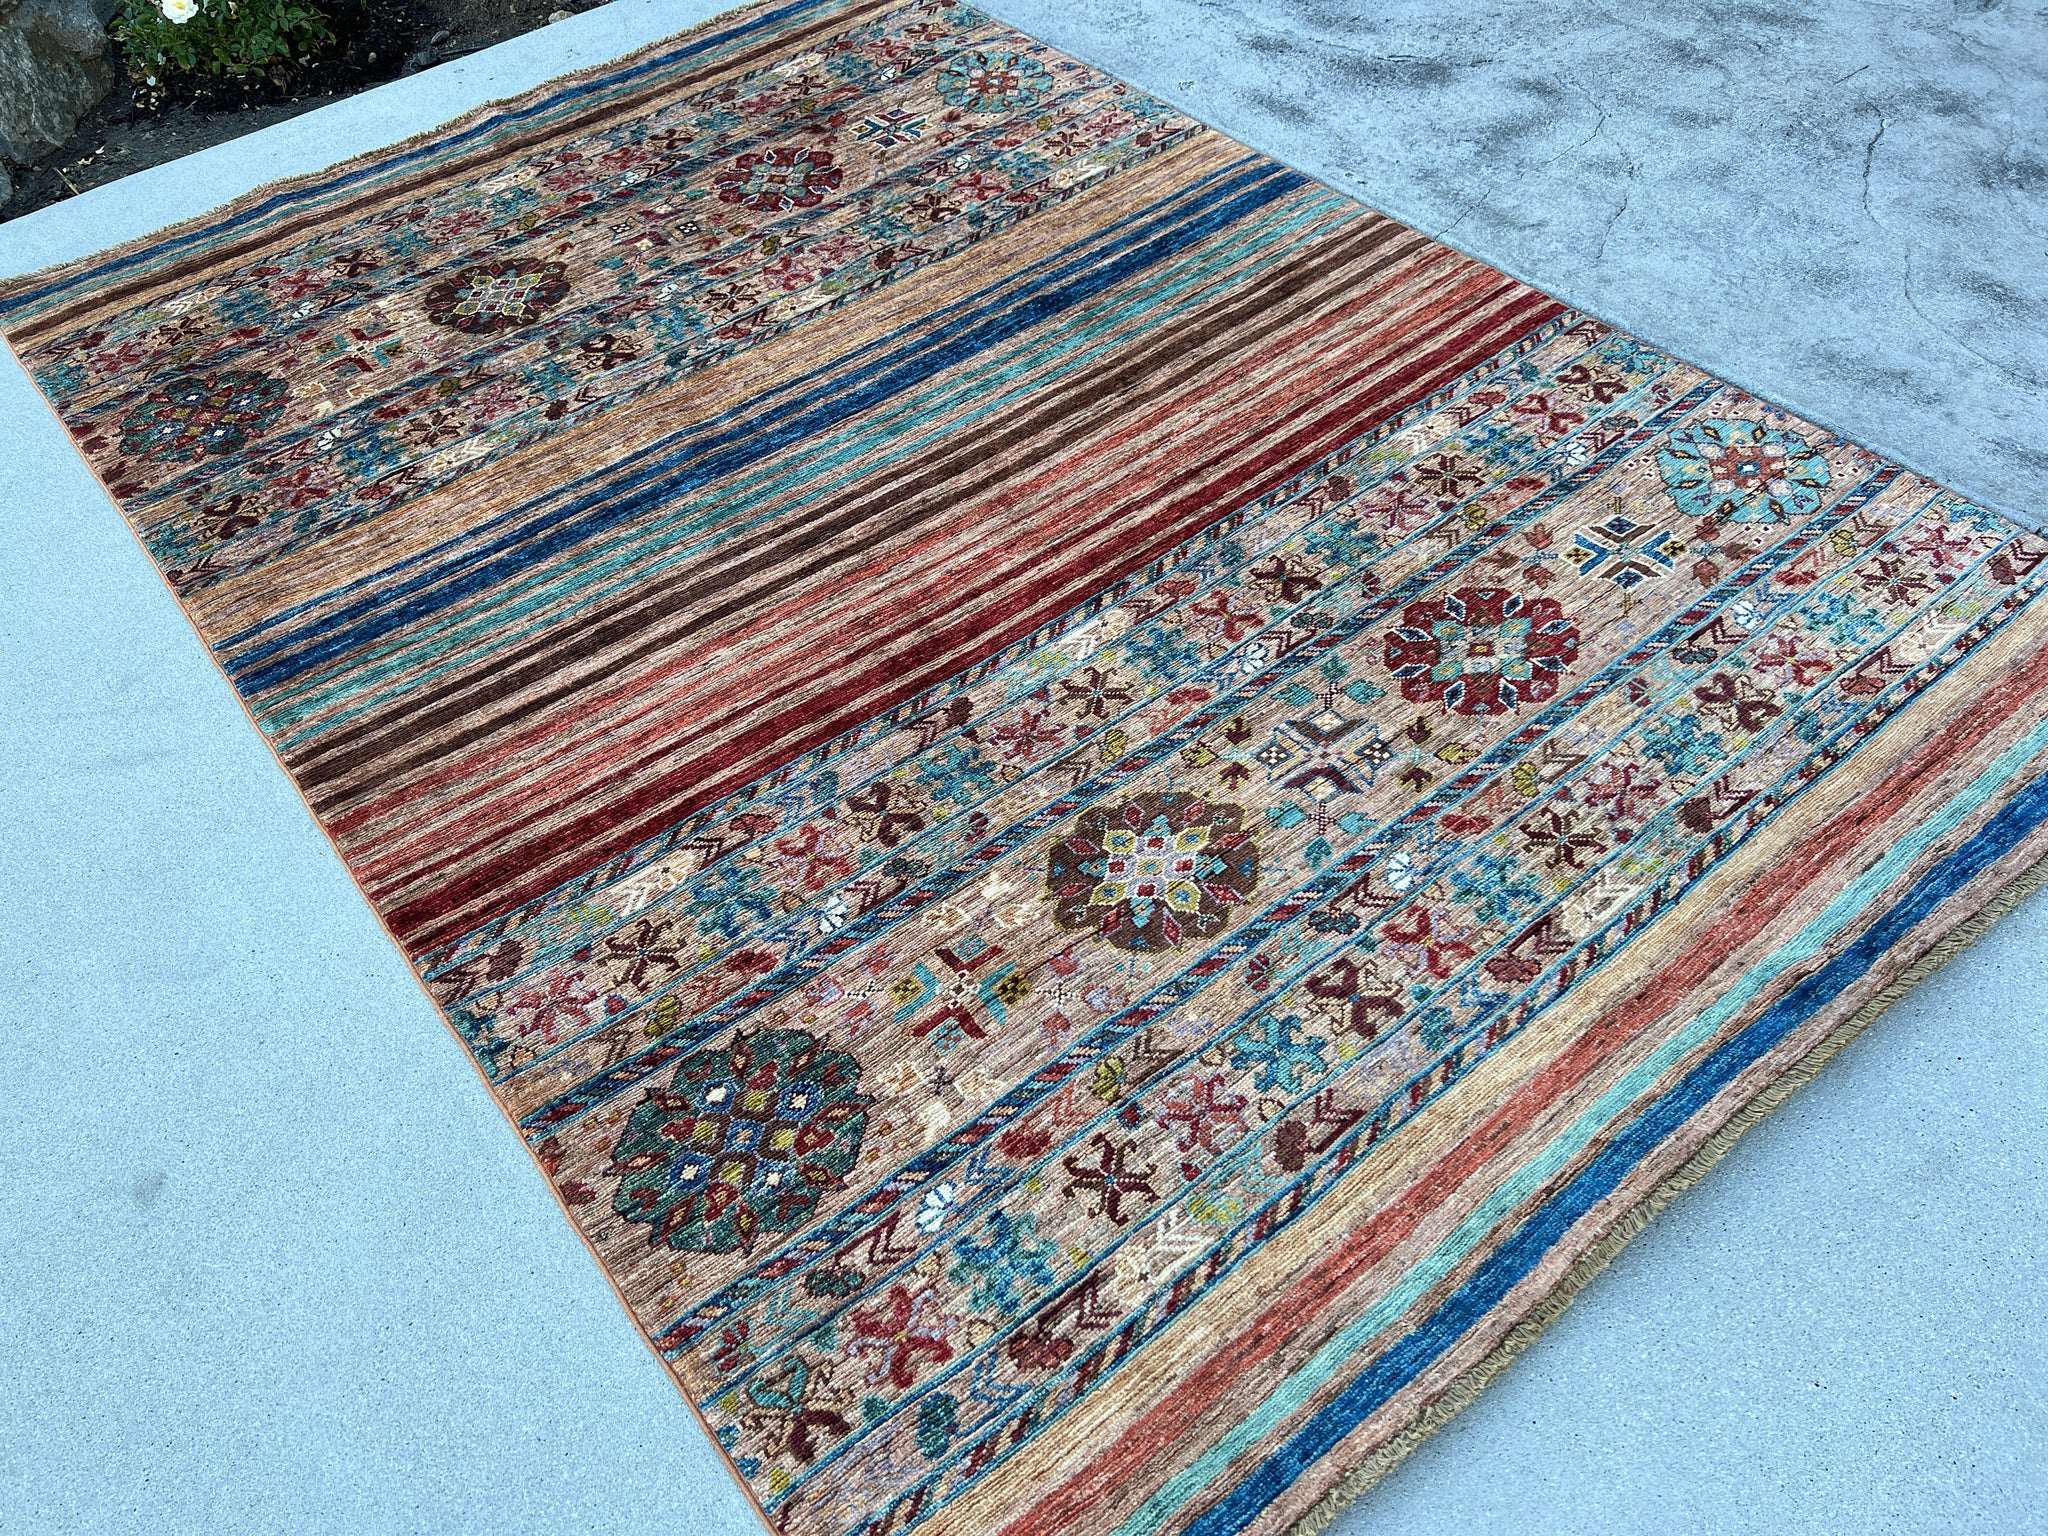 5x7 (150x215) Handmade Afghan Rug | Chocolate Brown Red Turquoise Teal Blue Olive Green Maroon Lavender Gold Ivory | Floral Tribal Wool